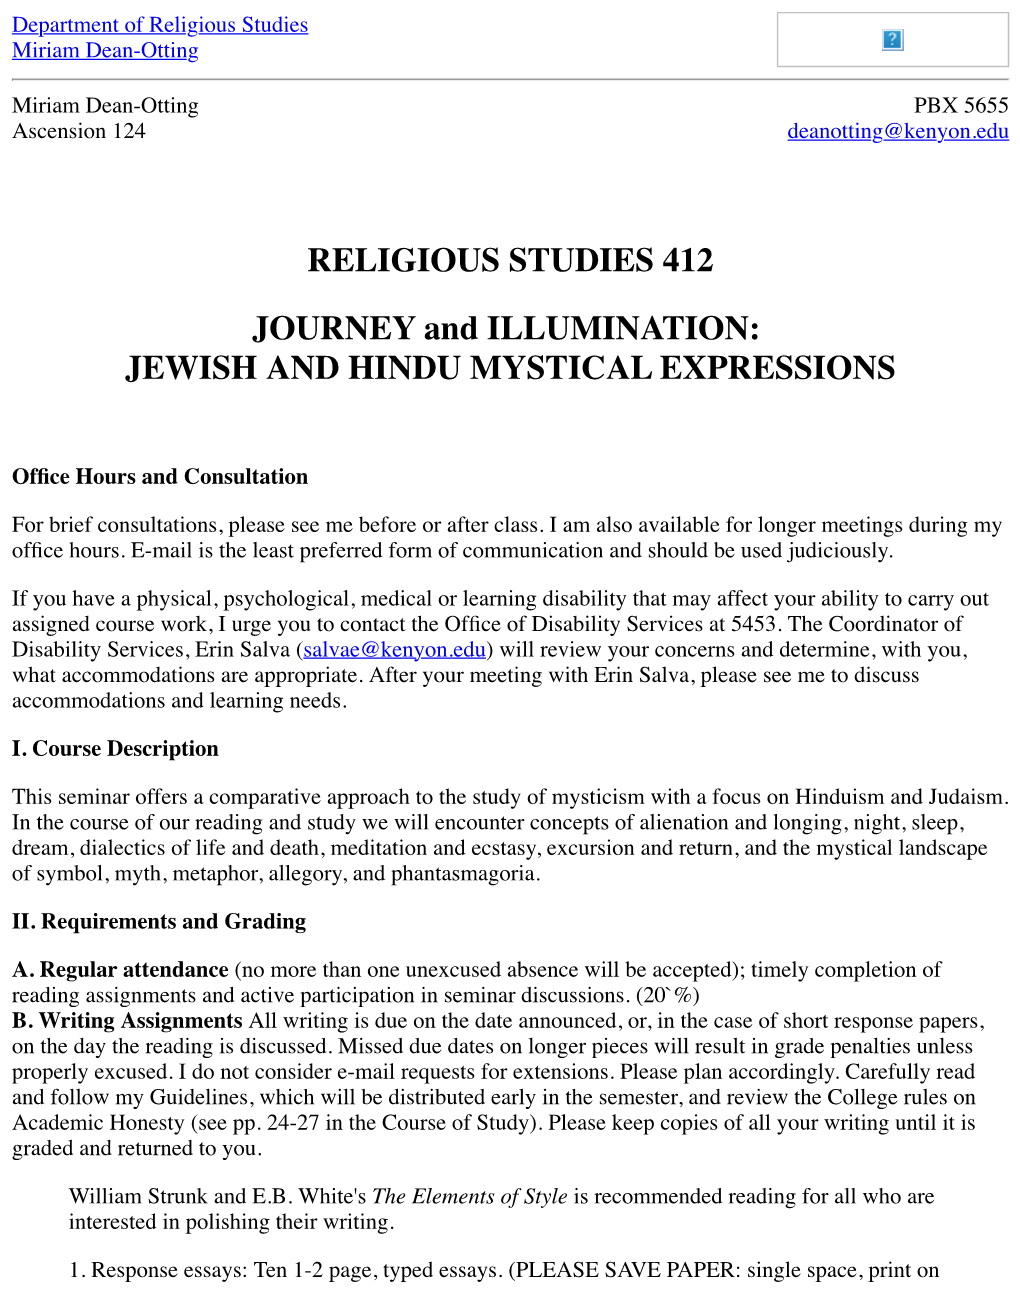 RELIGIOUS STUDIES 412 JOURNEY and ILLUMINATION: JEWISH and HINDU MYSTICAL EXPRESSIONS